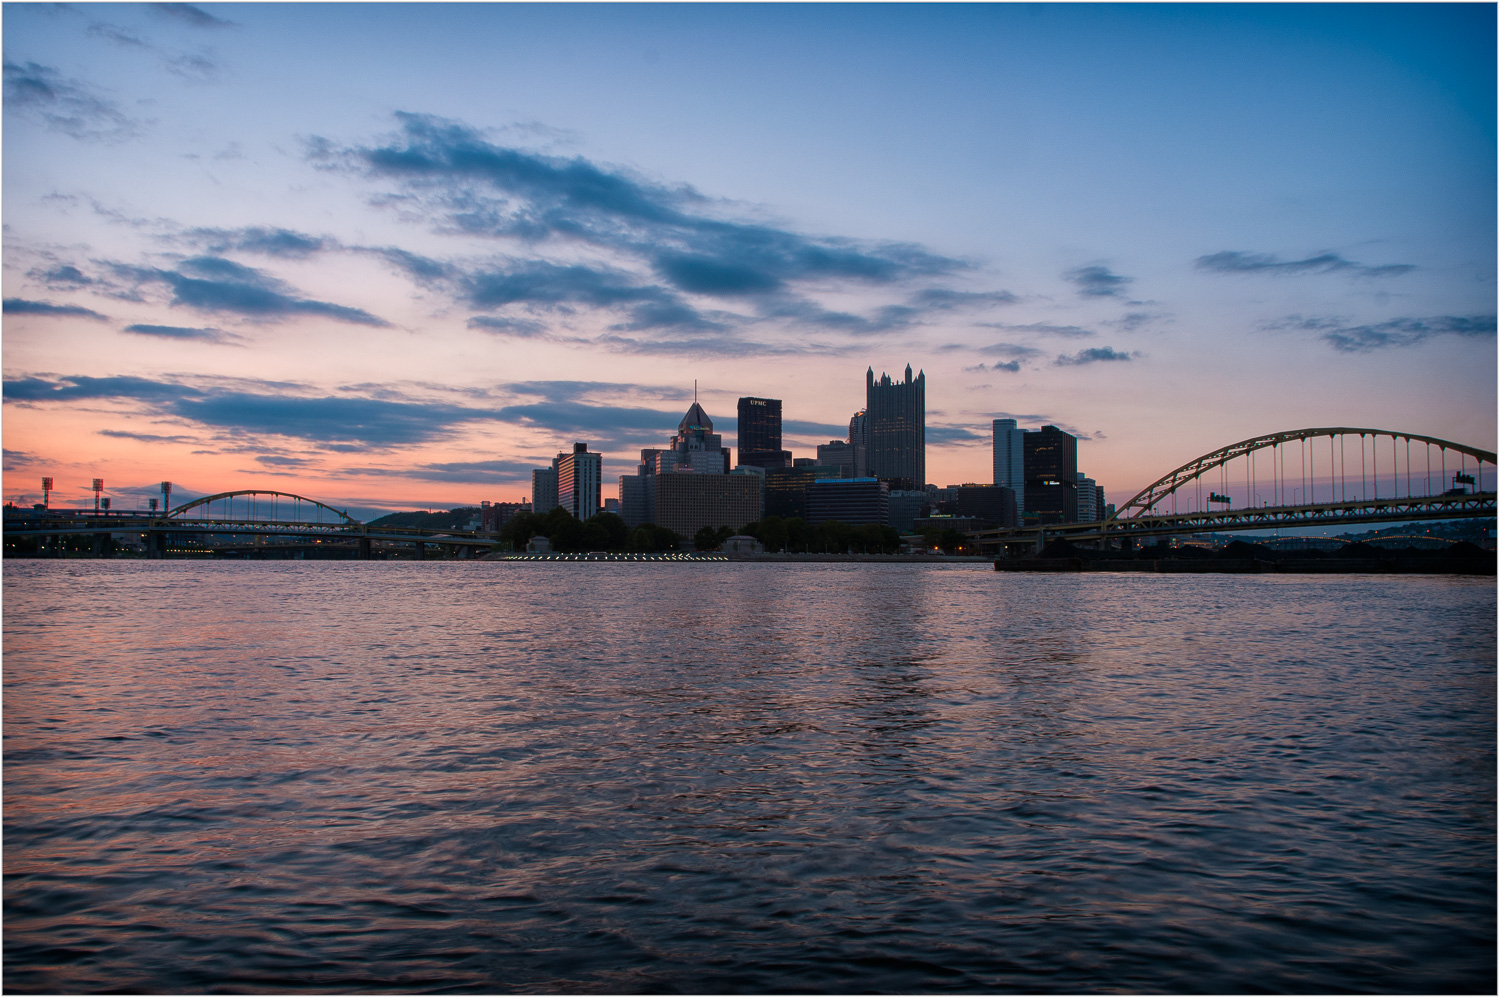 Watching-The-Sunrise-From-The-Banks-Of-The-Ohio.jpg